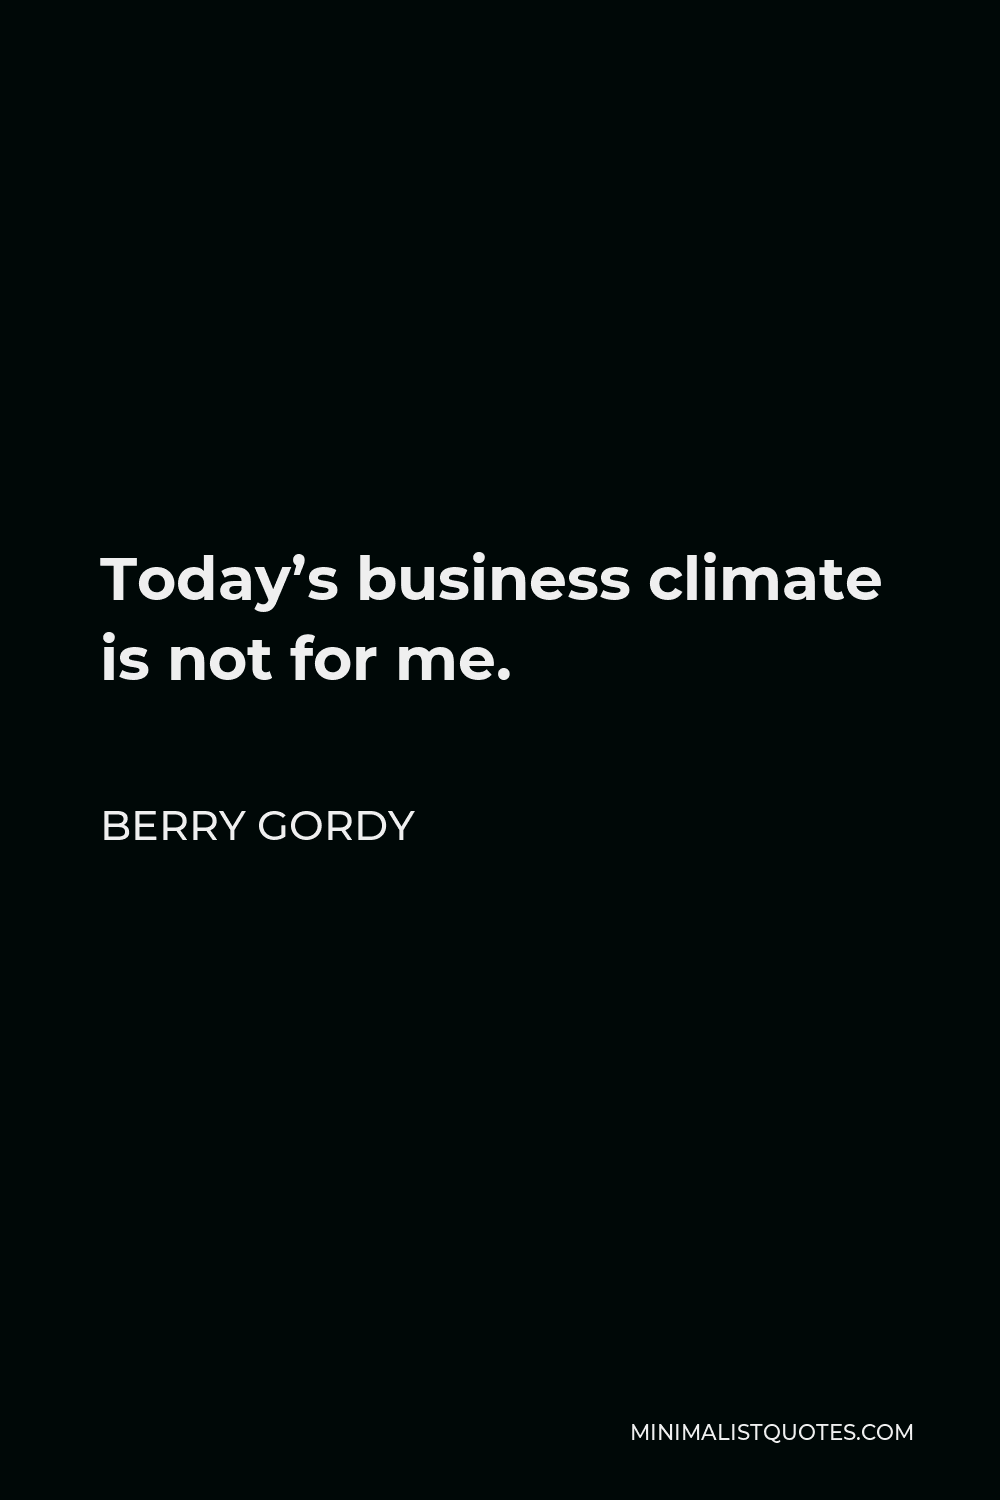 Berry Gordy Quote - Today’s business climate is not for me.